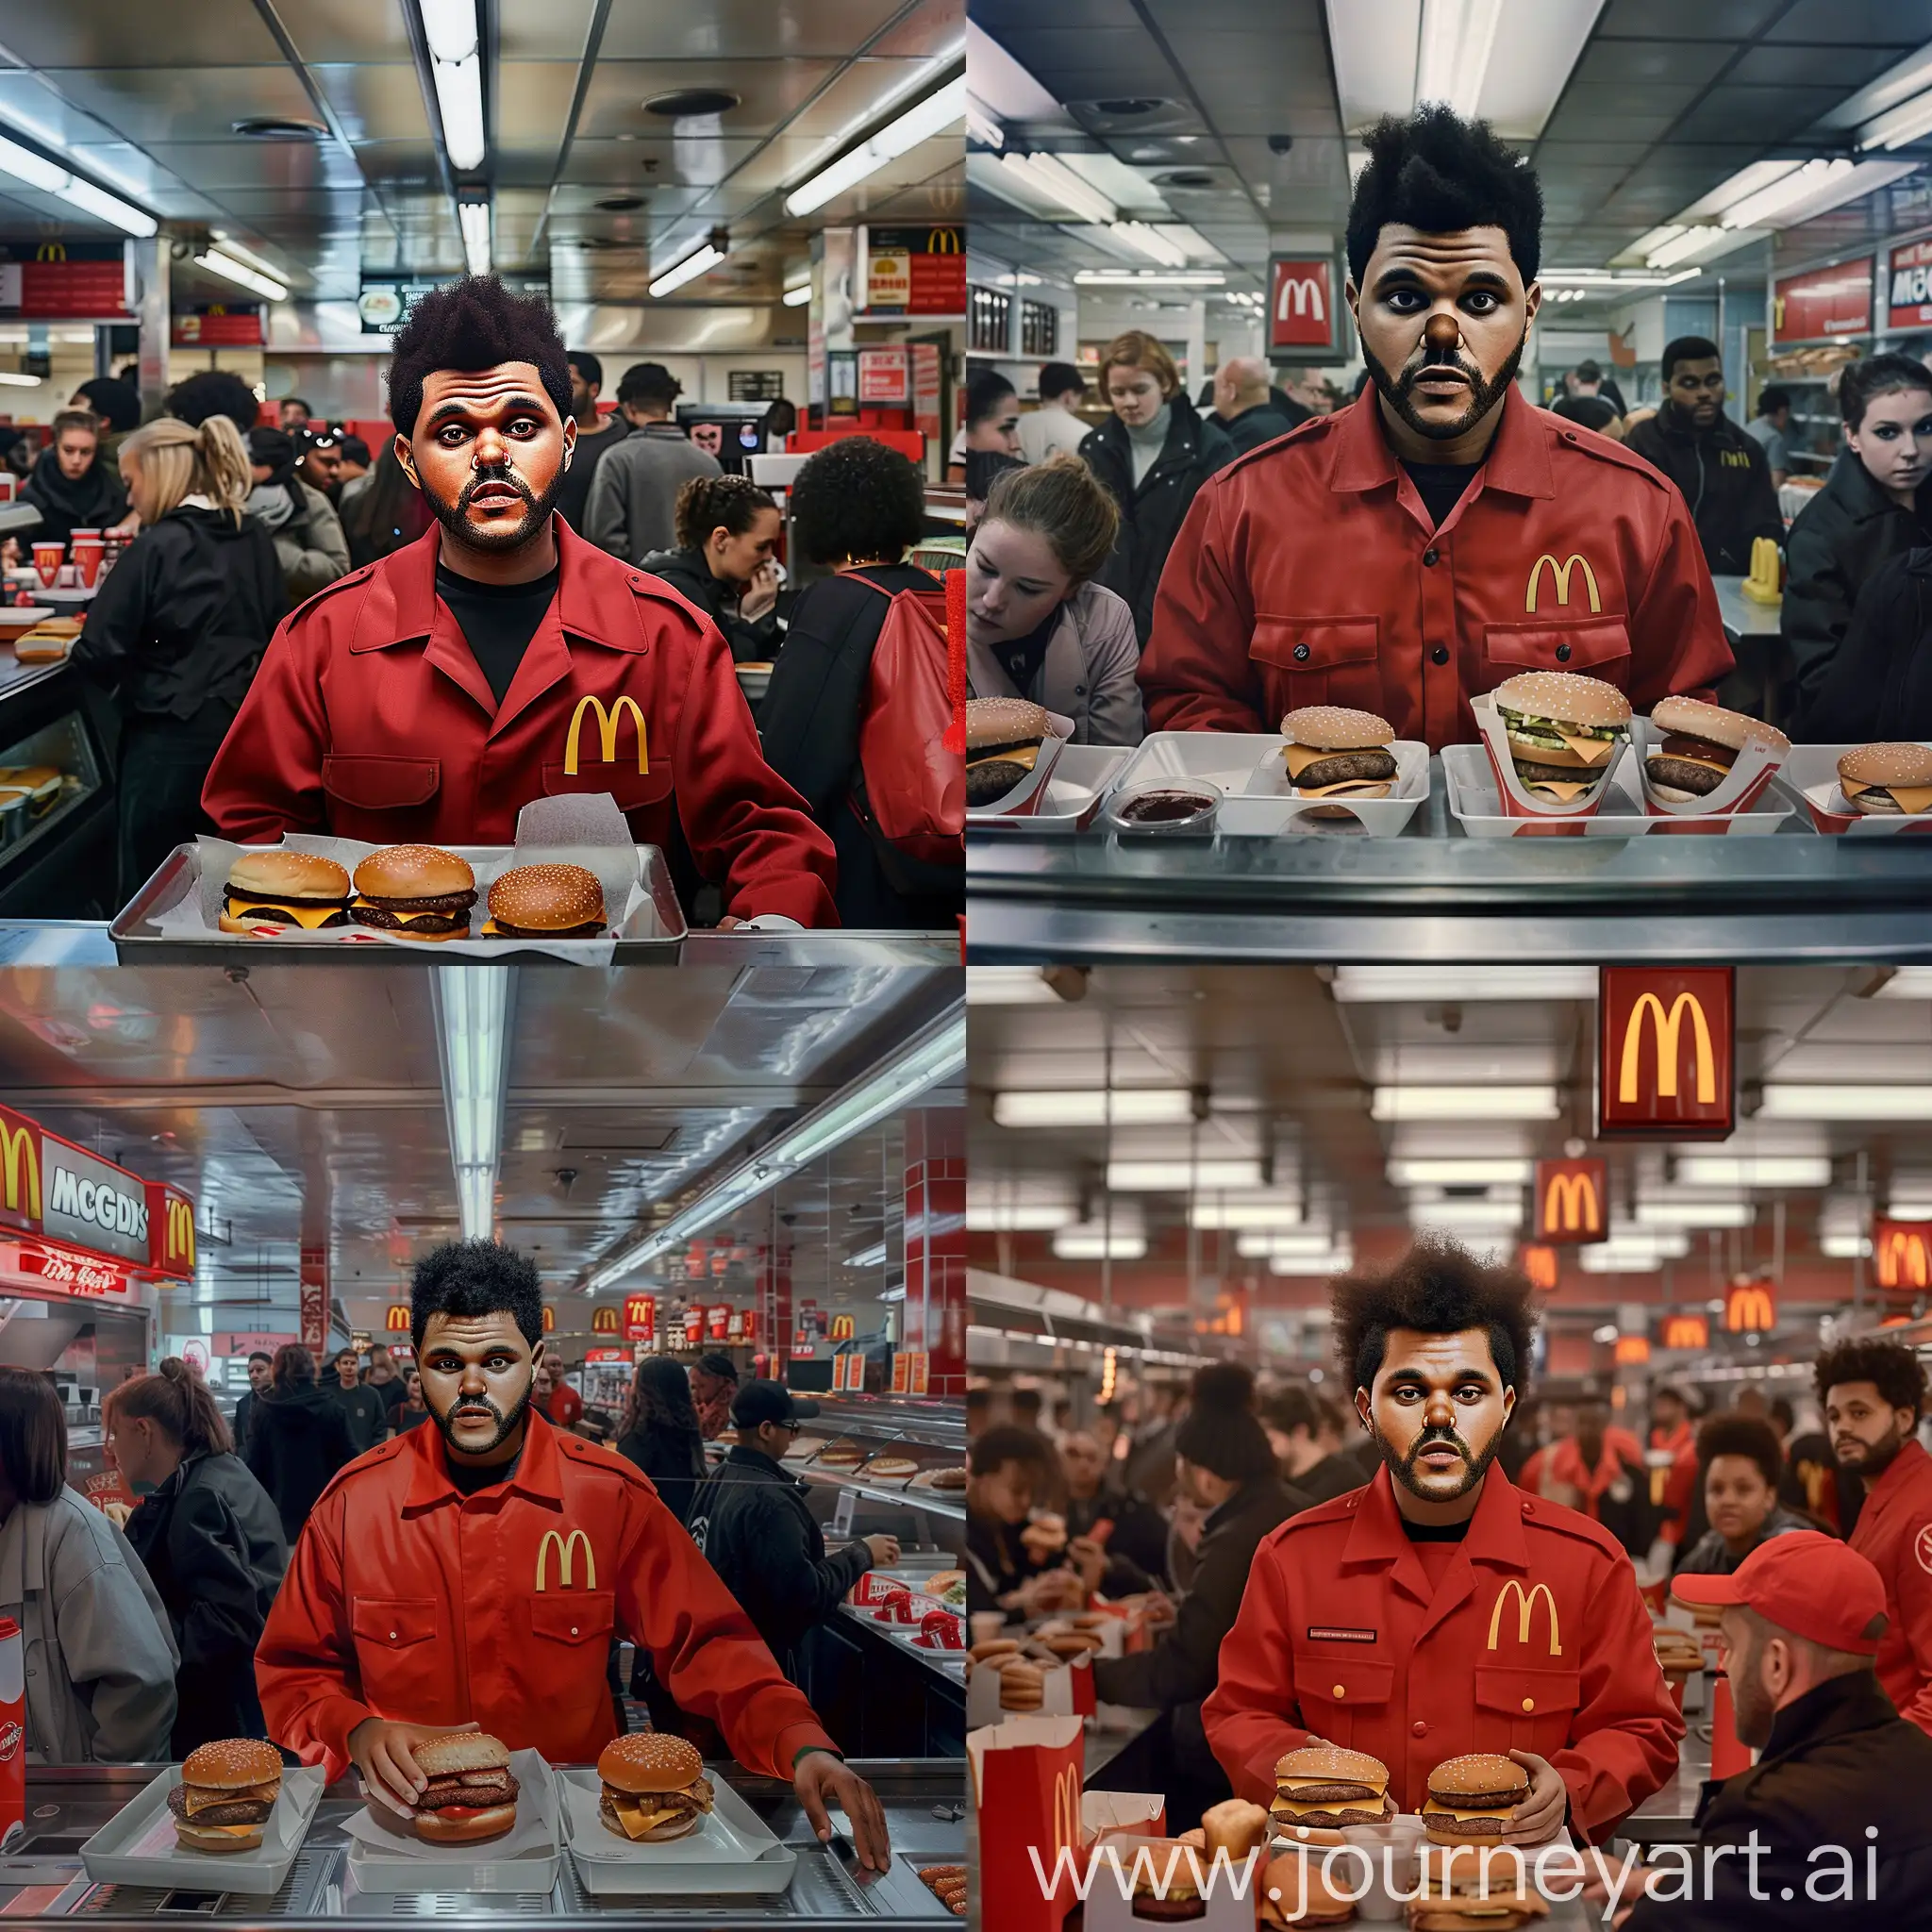 "Experience the hustle and bustle of a busy fast food restaurant through the eyes of The Weeknd
Canadian singer, captured in a hyperrealistic photograph as he serves McDonald's Burgers to customers in his McDonald's uniform." --ar 4:5